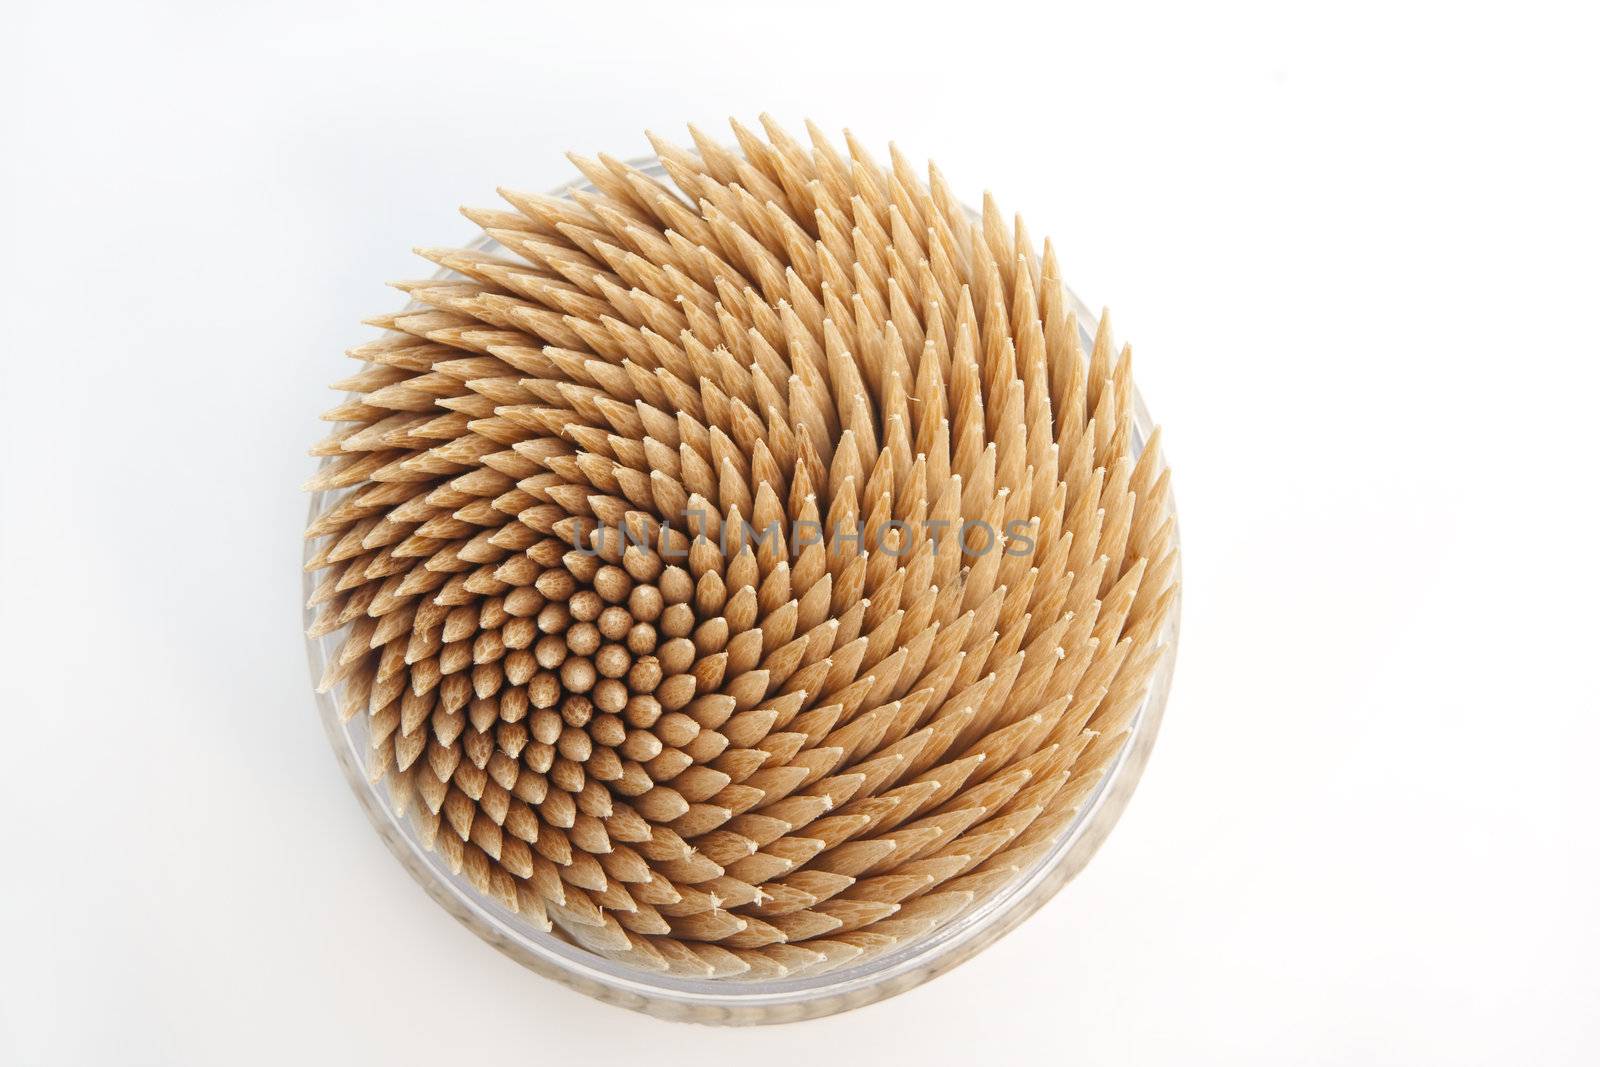 packaging timber of toothpicks on a white background